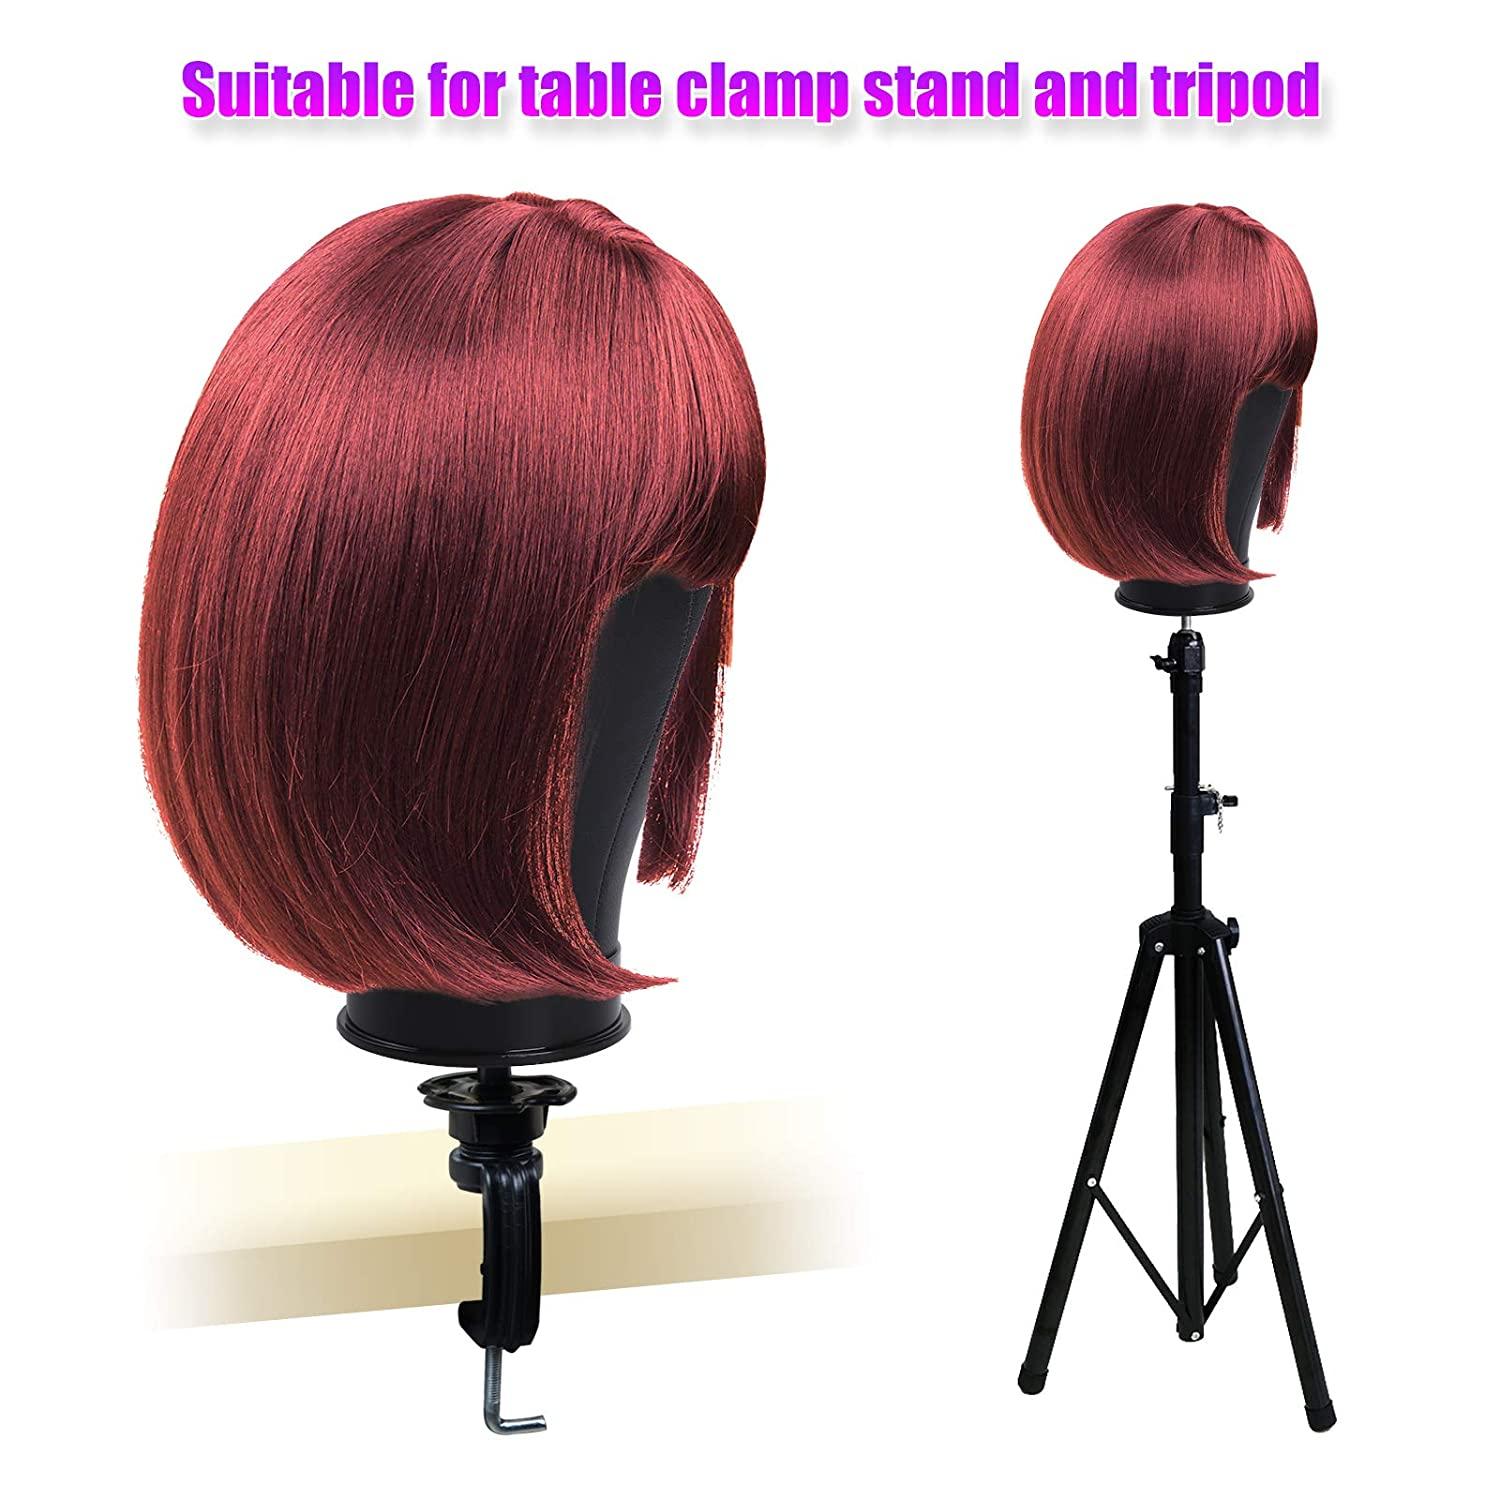 Mannequin Head Holders Black Wig Stand Desk Stable Clamp